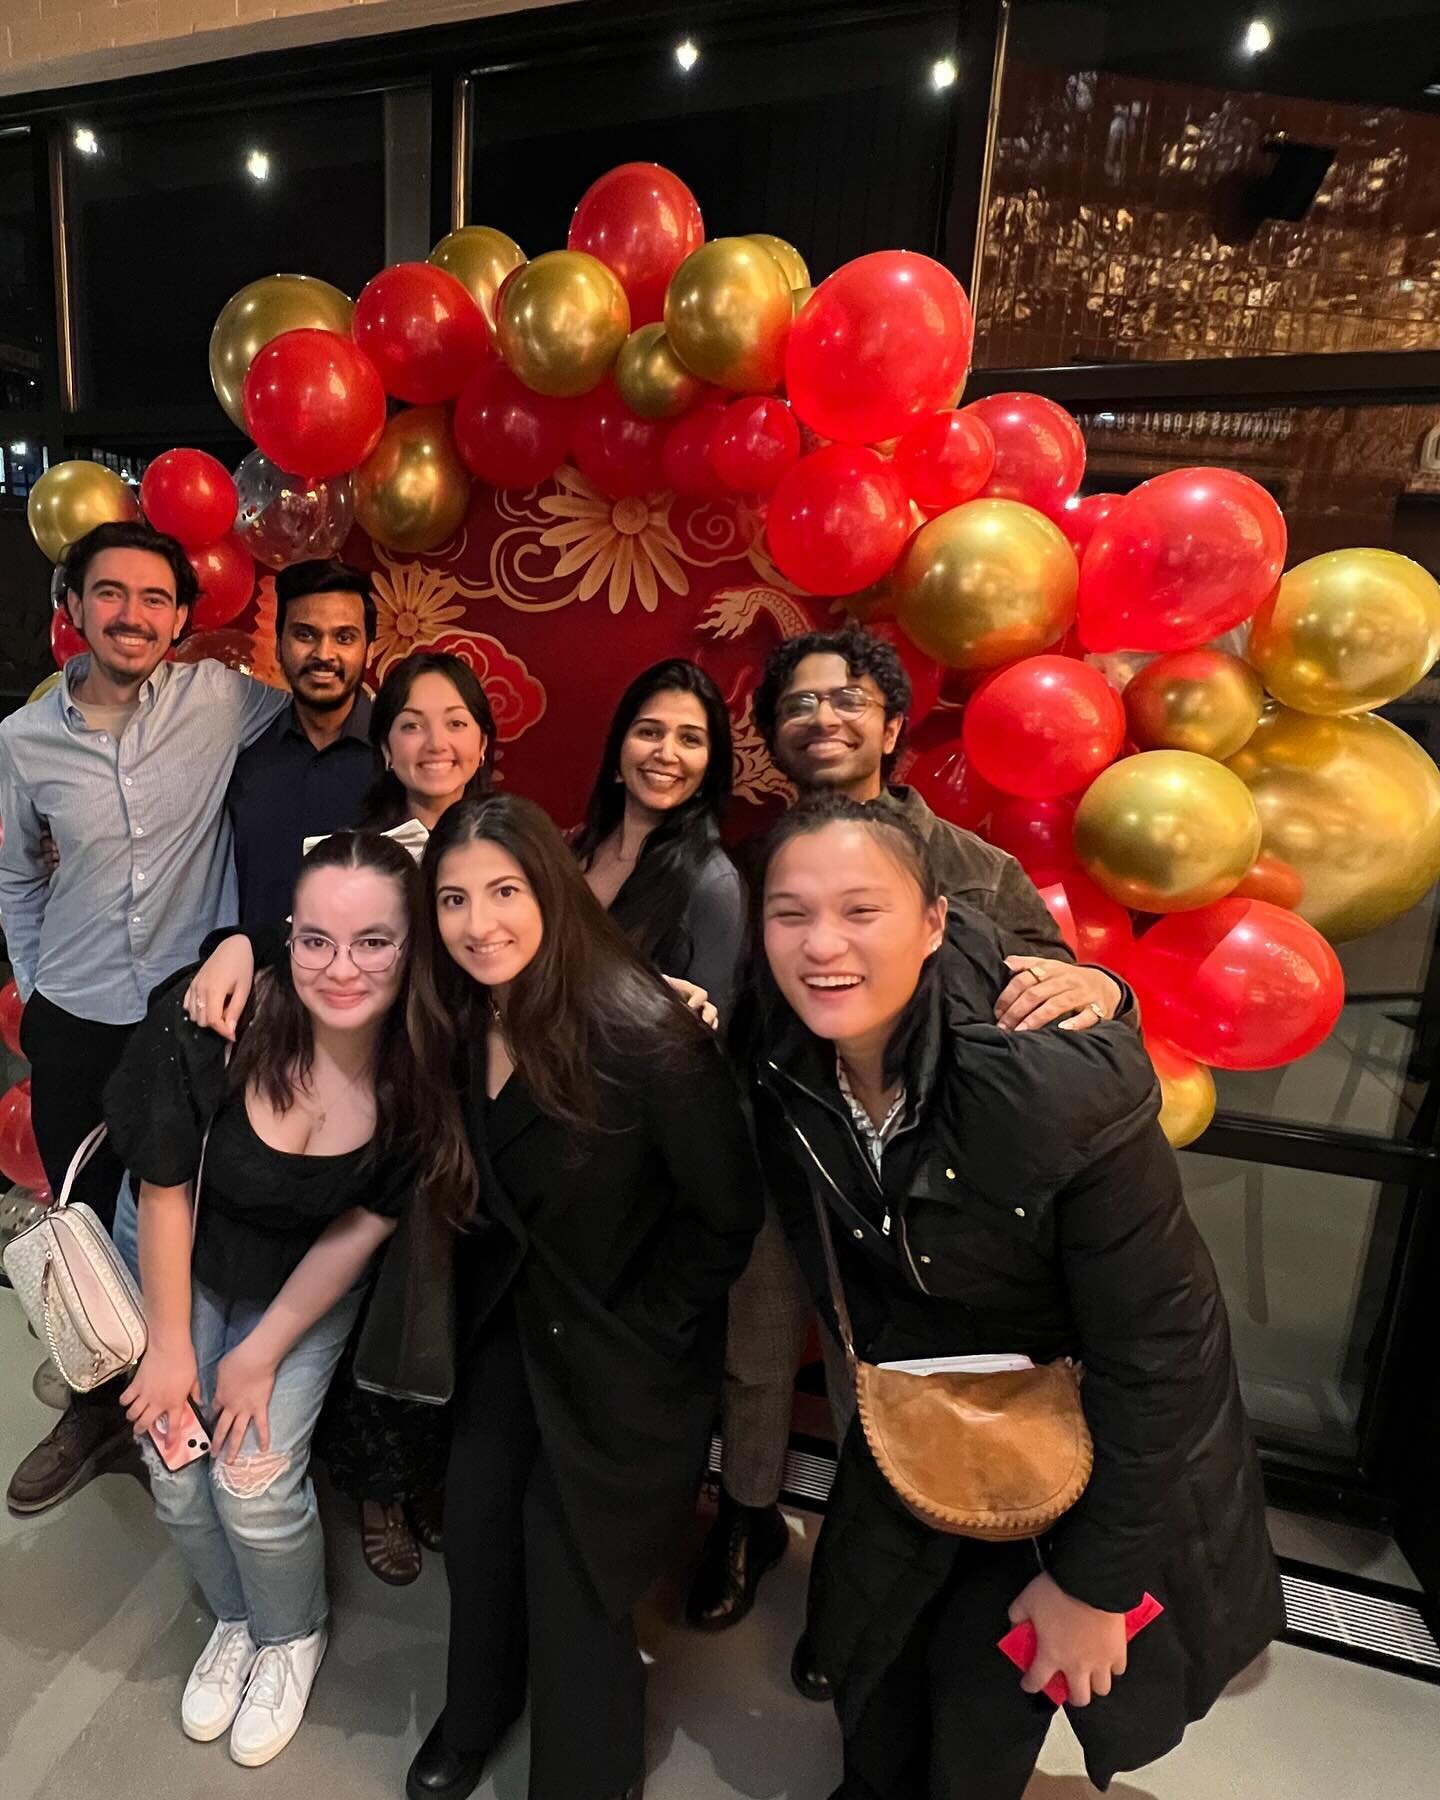 Happy Lunar New Year from Stir Friday Night! And thank you to @guinnessbrewerychi for their donation to SFN! You all hosted a wonderful event to kick in the new year!
🐲🧧🧧🧧🐲